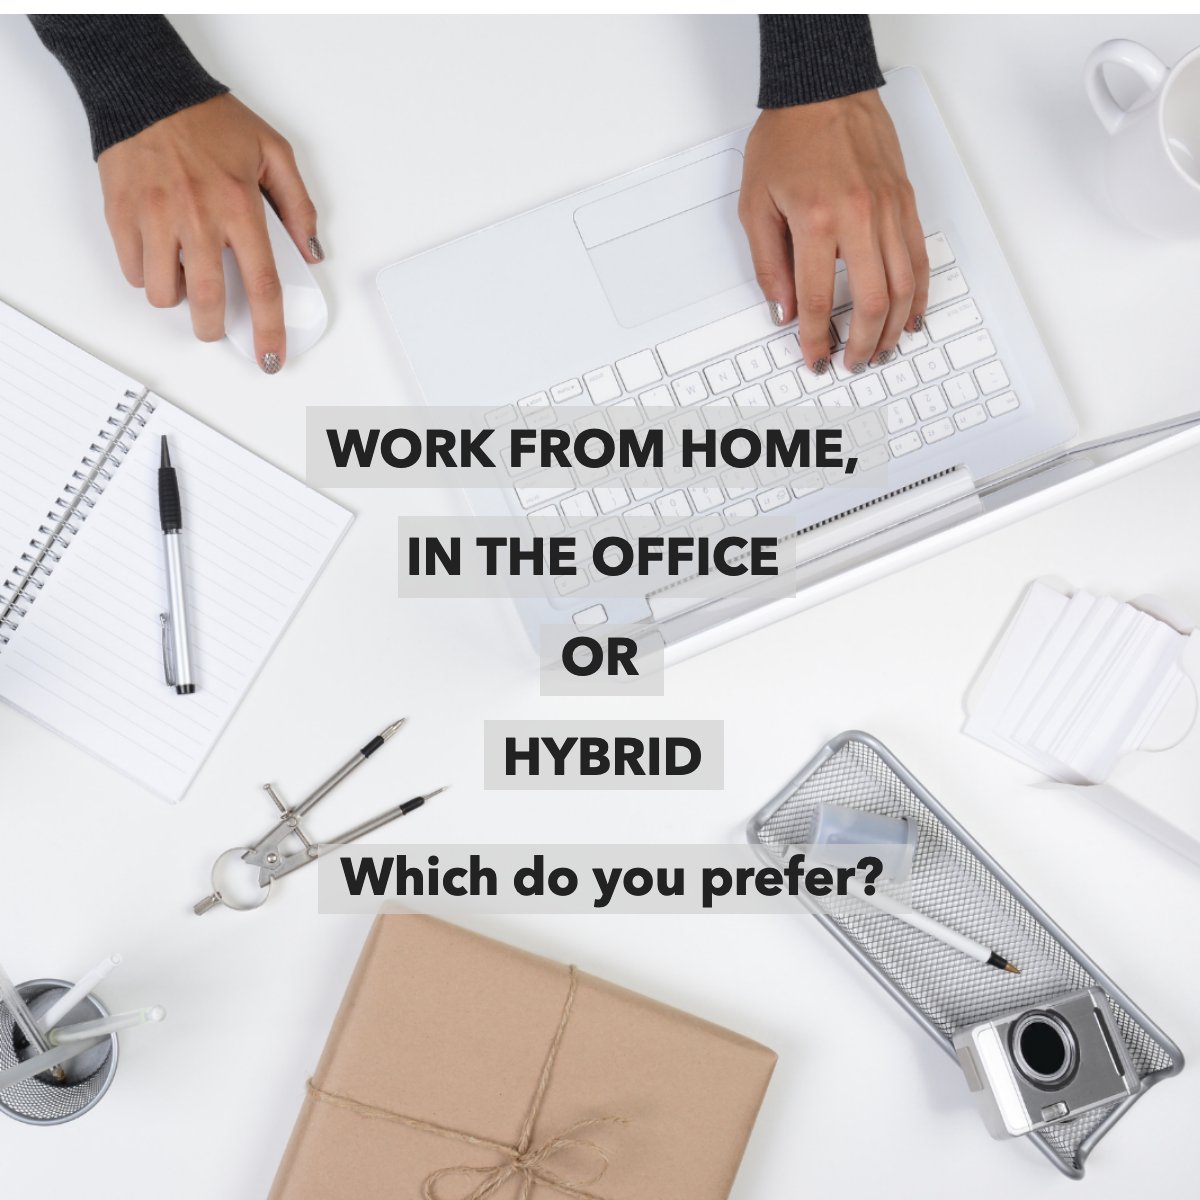 Do you have a dedicated working space? 💻
 
Tell us in the comments! 💭 

#question #workspace #worklife #homeoffice #hybridwork
 #MVPRealty #Jayneyardenrealtor #Gulfcoastrealestate #Tampabayrealestate #floridarealestateforsale #florida #movetoflorida